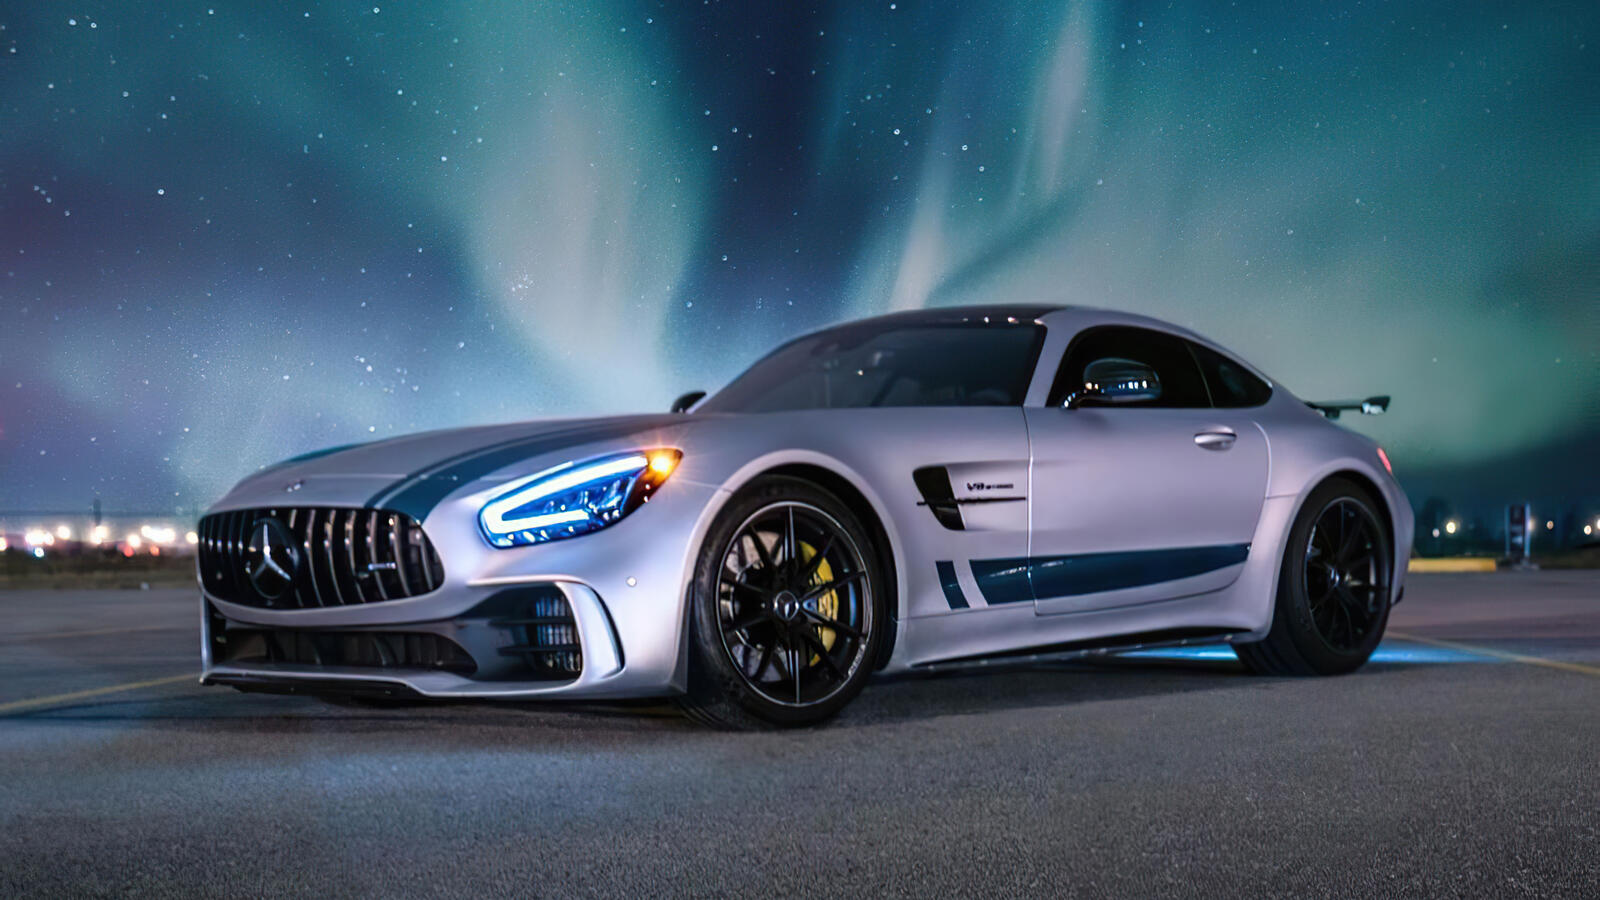 Free photo Mercedes Benz AMG against the night sky.